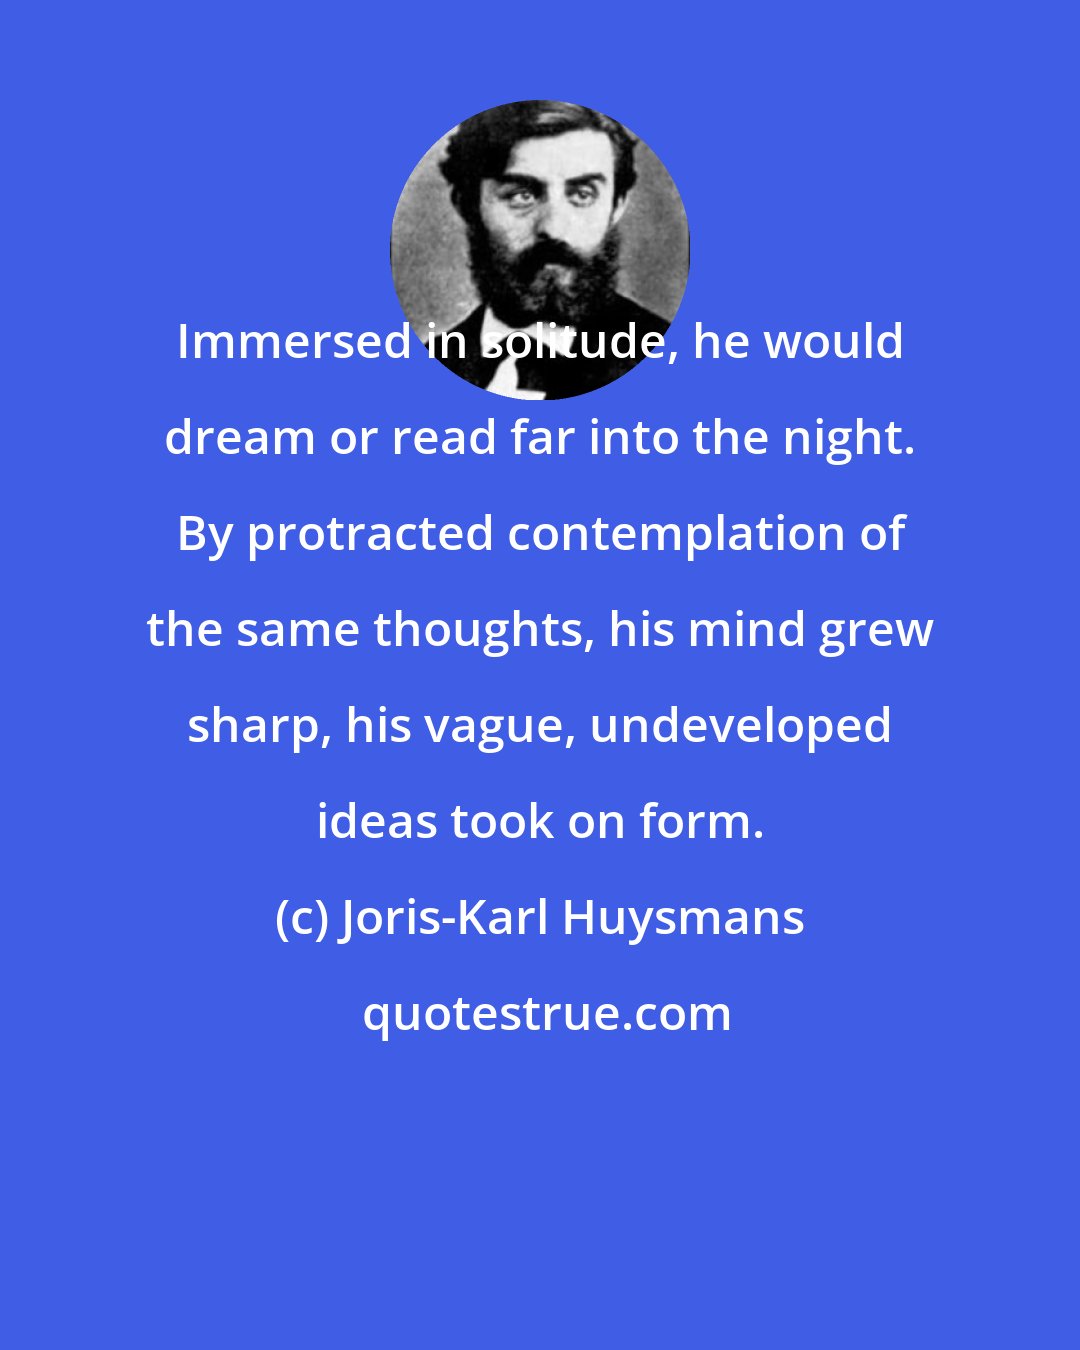 Joris-Karl Huysmans: Immersed in solitude, he would dream or read far into the night. By protracted contemplation of the same thoughts, his mind grew sharp, his vague, undeveloped ideas took on form.